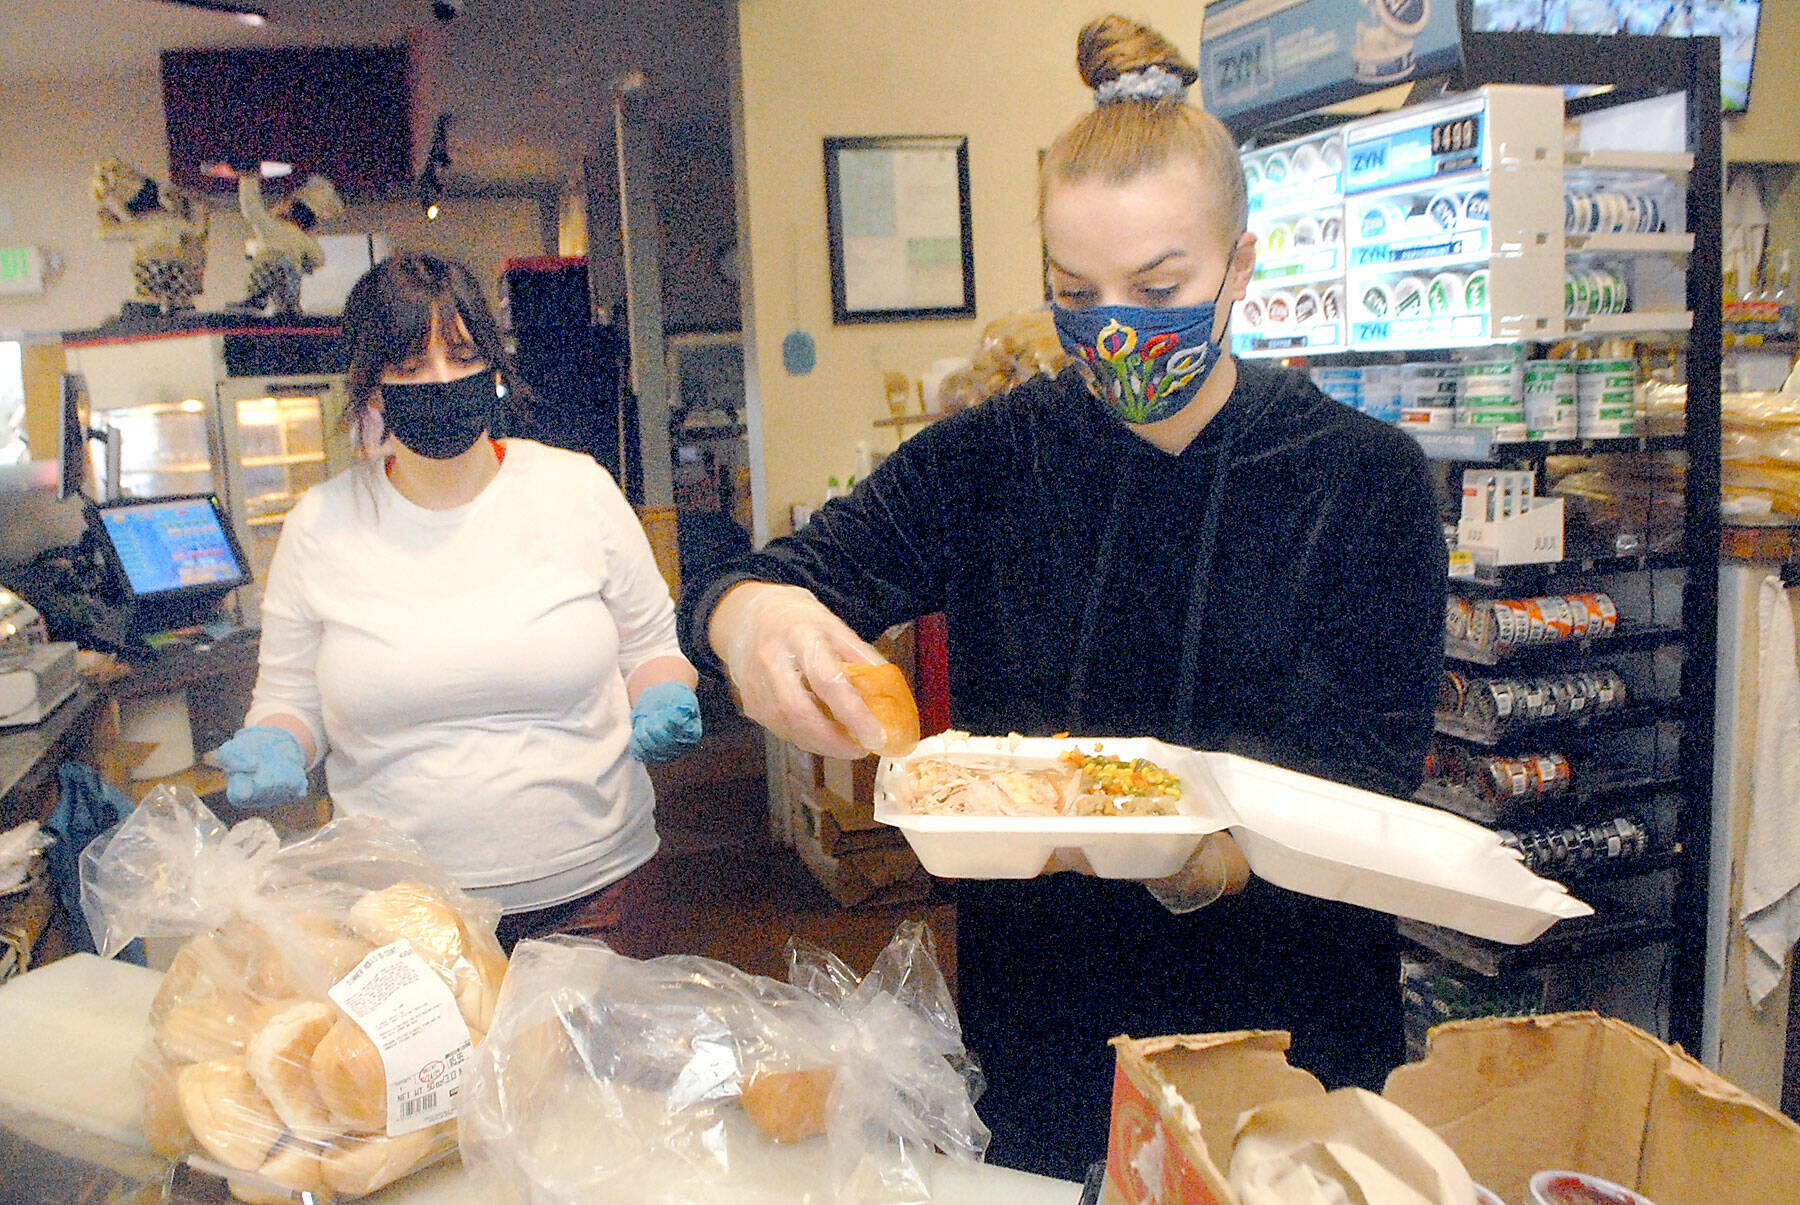 Volunteer Tenisha Towless, front, assembles a carry-out Thanksgiving meal as fellow volunteer Sarah Gaylord waits to distribute it to a hungry guest on Thursday at Hardy’s Market in Sequim. The market and deli planned to give away about 200 free meals as part of their annual Thanksgiving tradition. (Keith Thorpe/Peninsula Daily News)